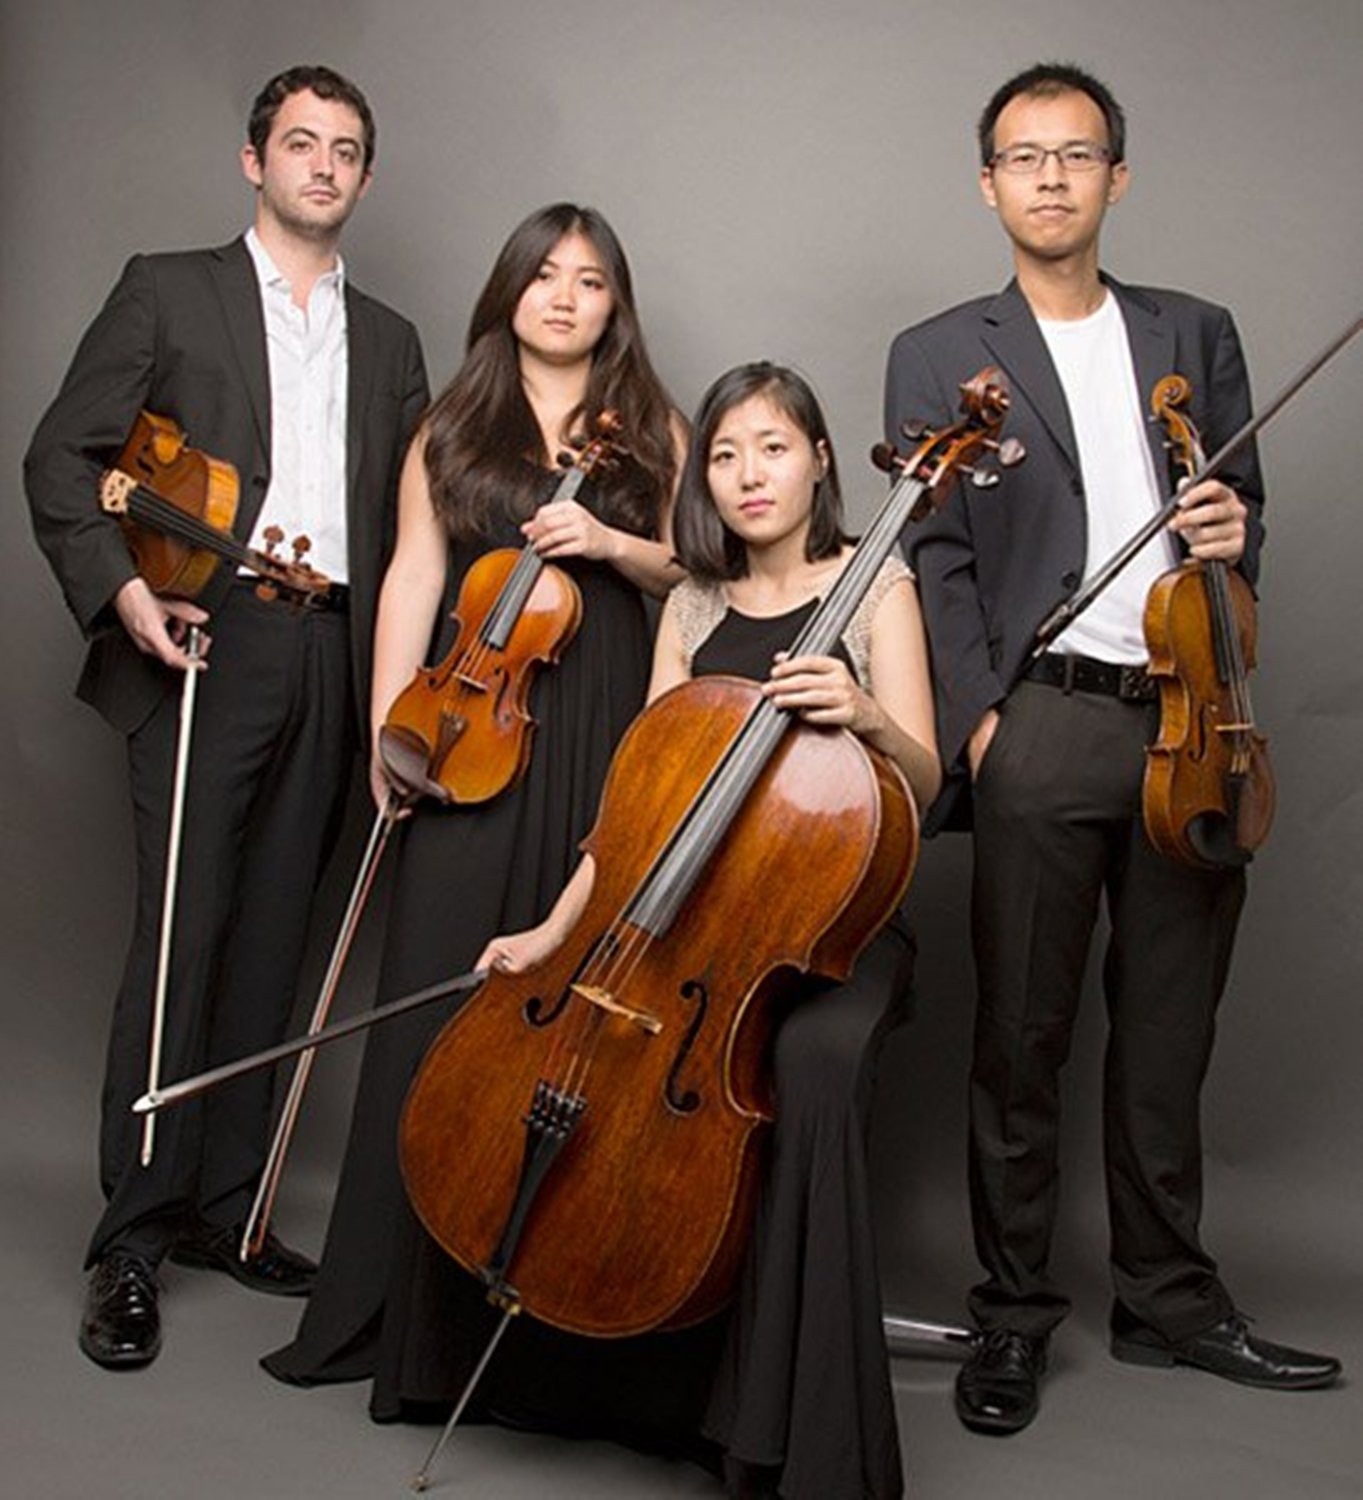 About the Zorá String Quartet, the New York Times wrote, “From the first phrase, played with rich sound and wistful beauty, I knew this would be an eloquent... performance.”